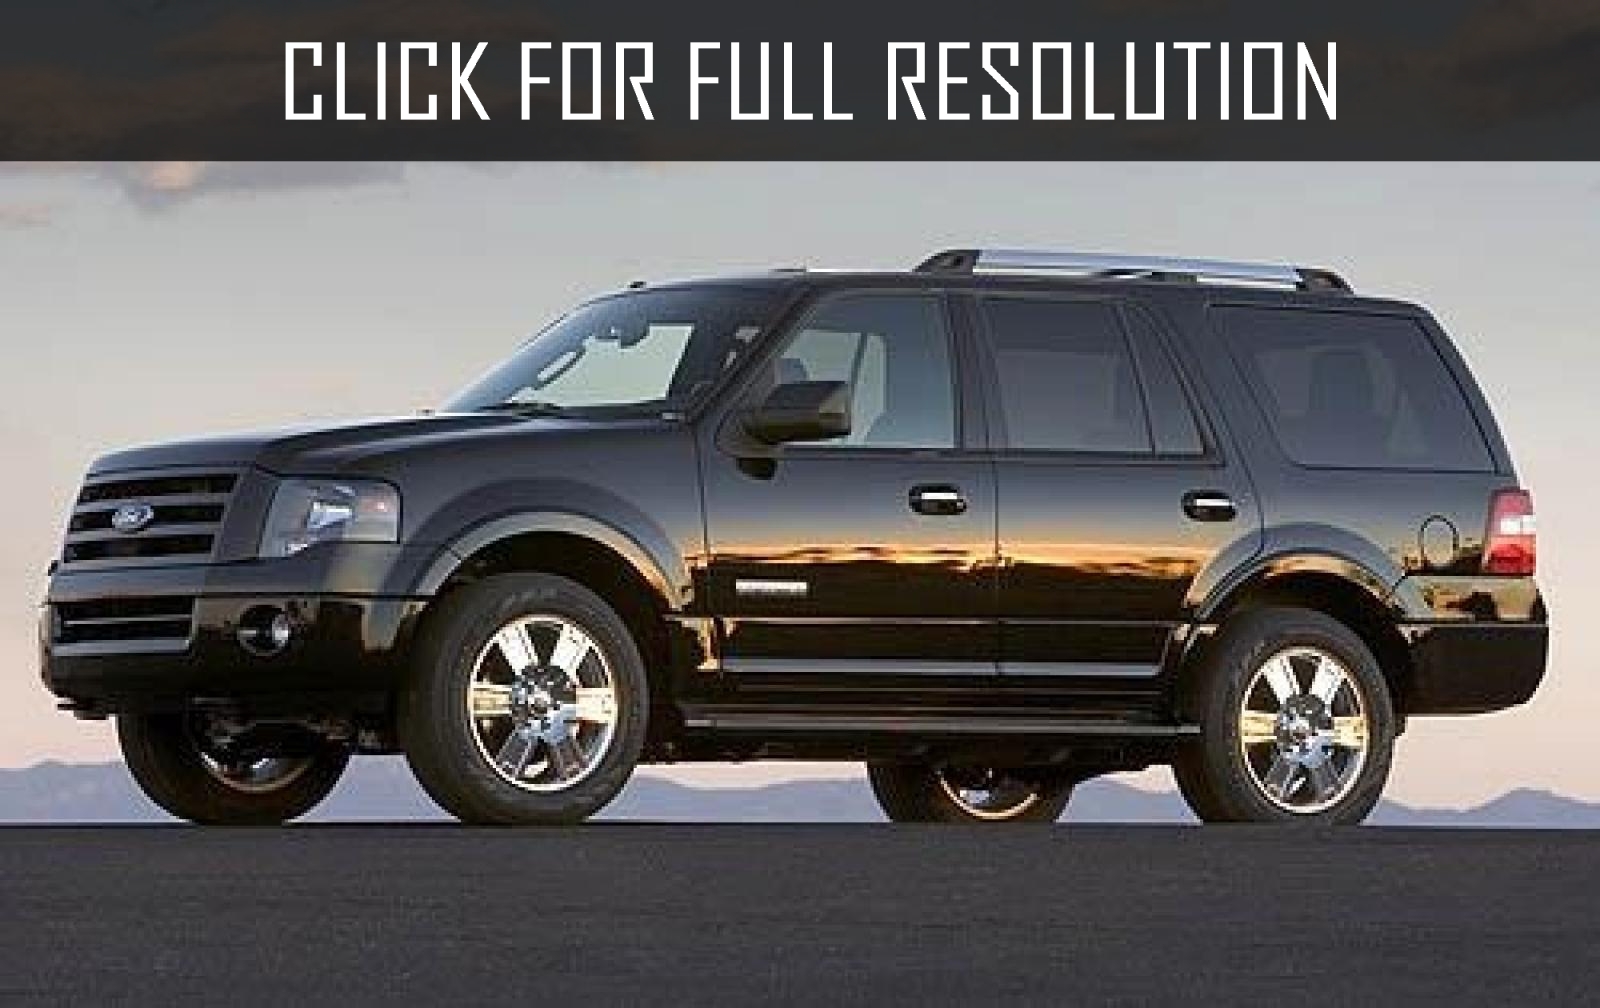 Ford Expedition El 4wd amazing photo gallery, some information and